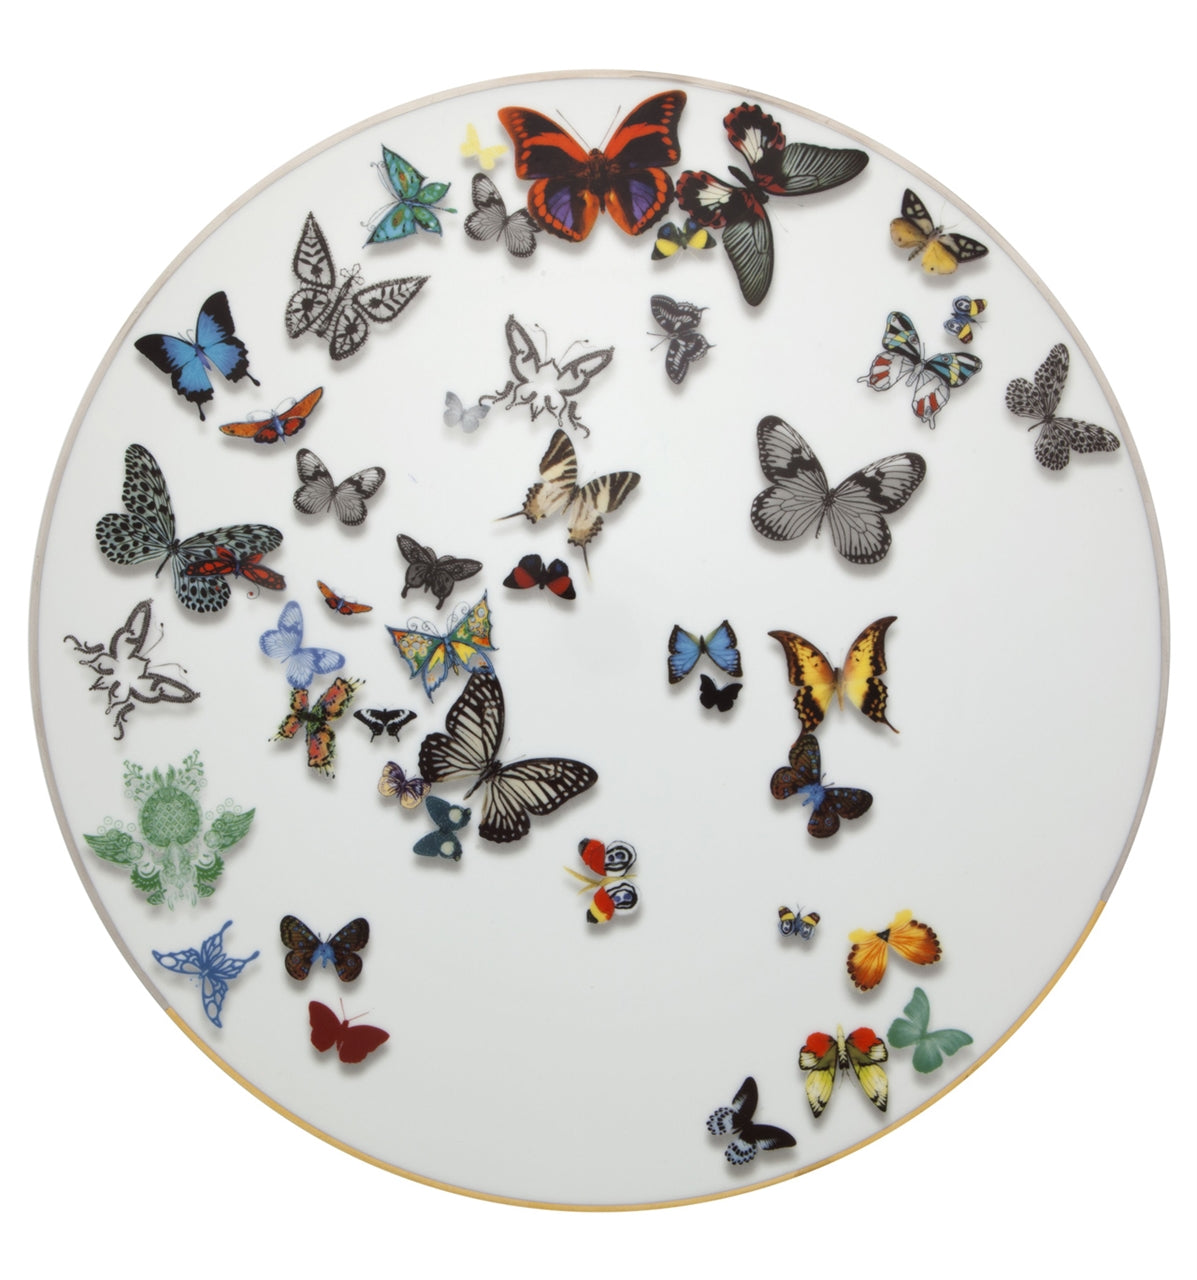 Christian Lacroix - Butterfly Parade - Charger Plate